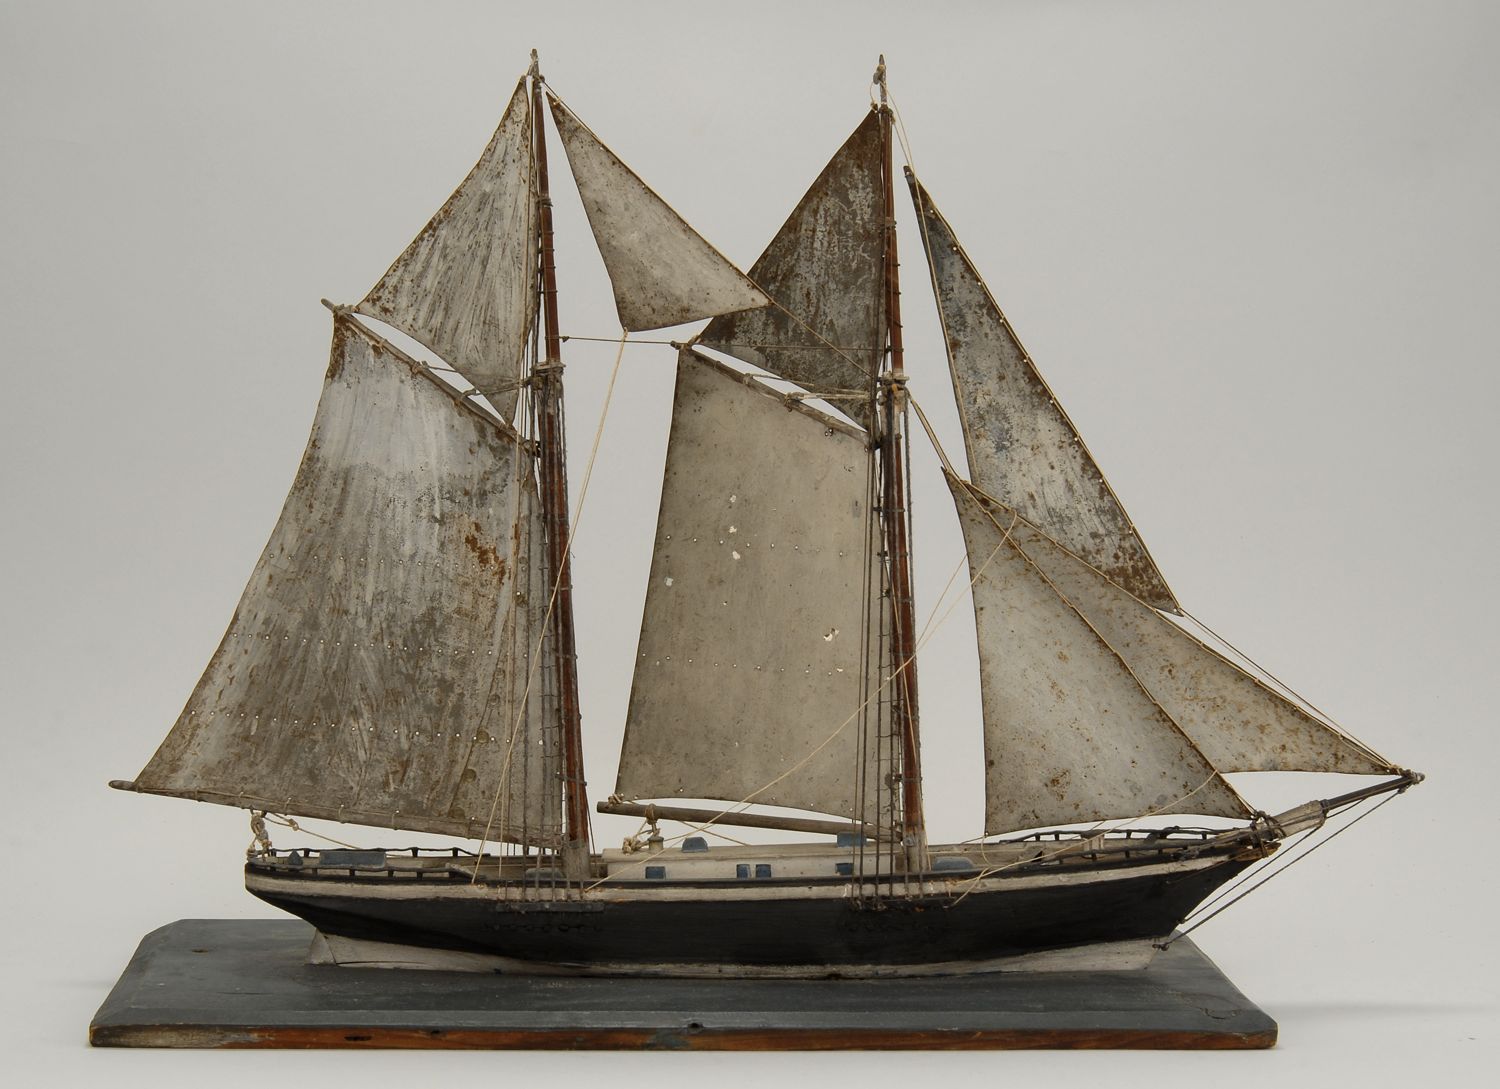 MODEL OF A TWO-MASTED SCHOONERLate 19th/Early